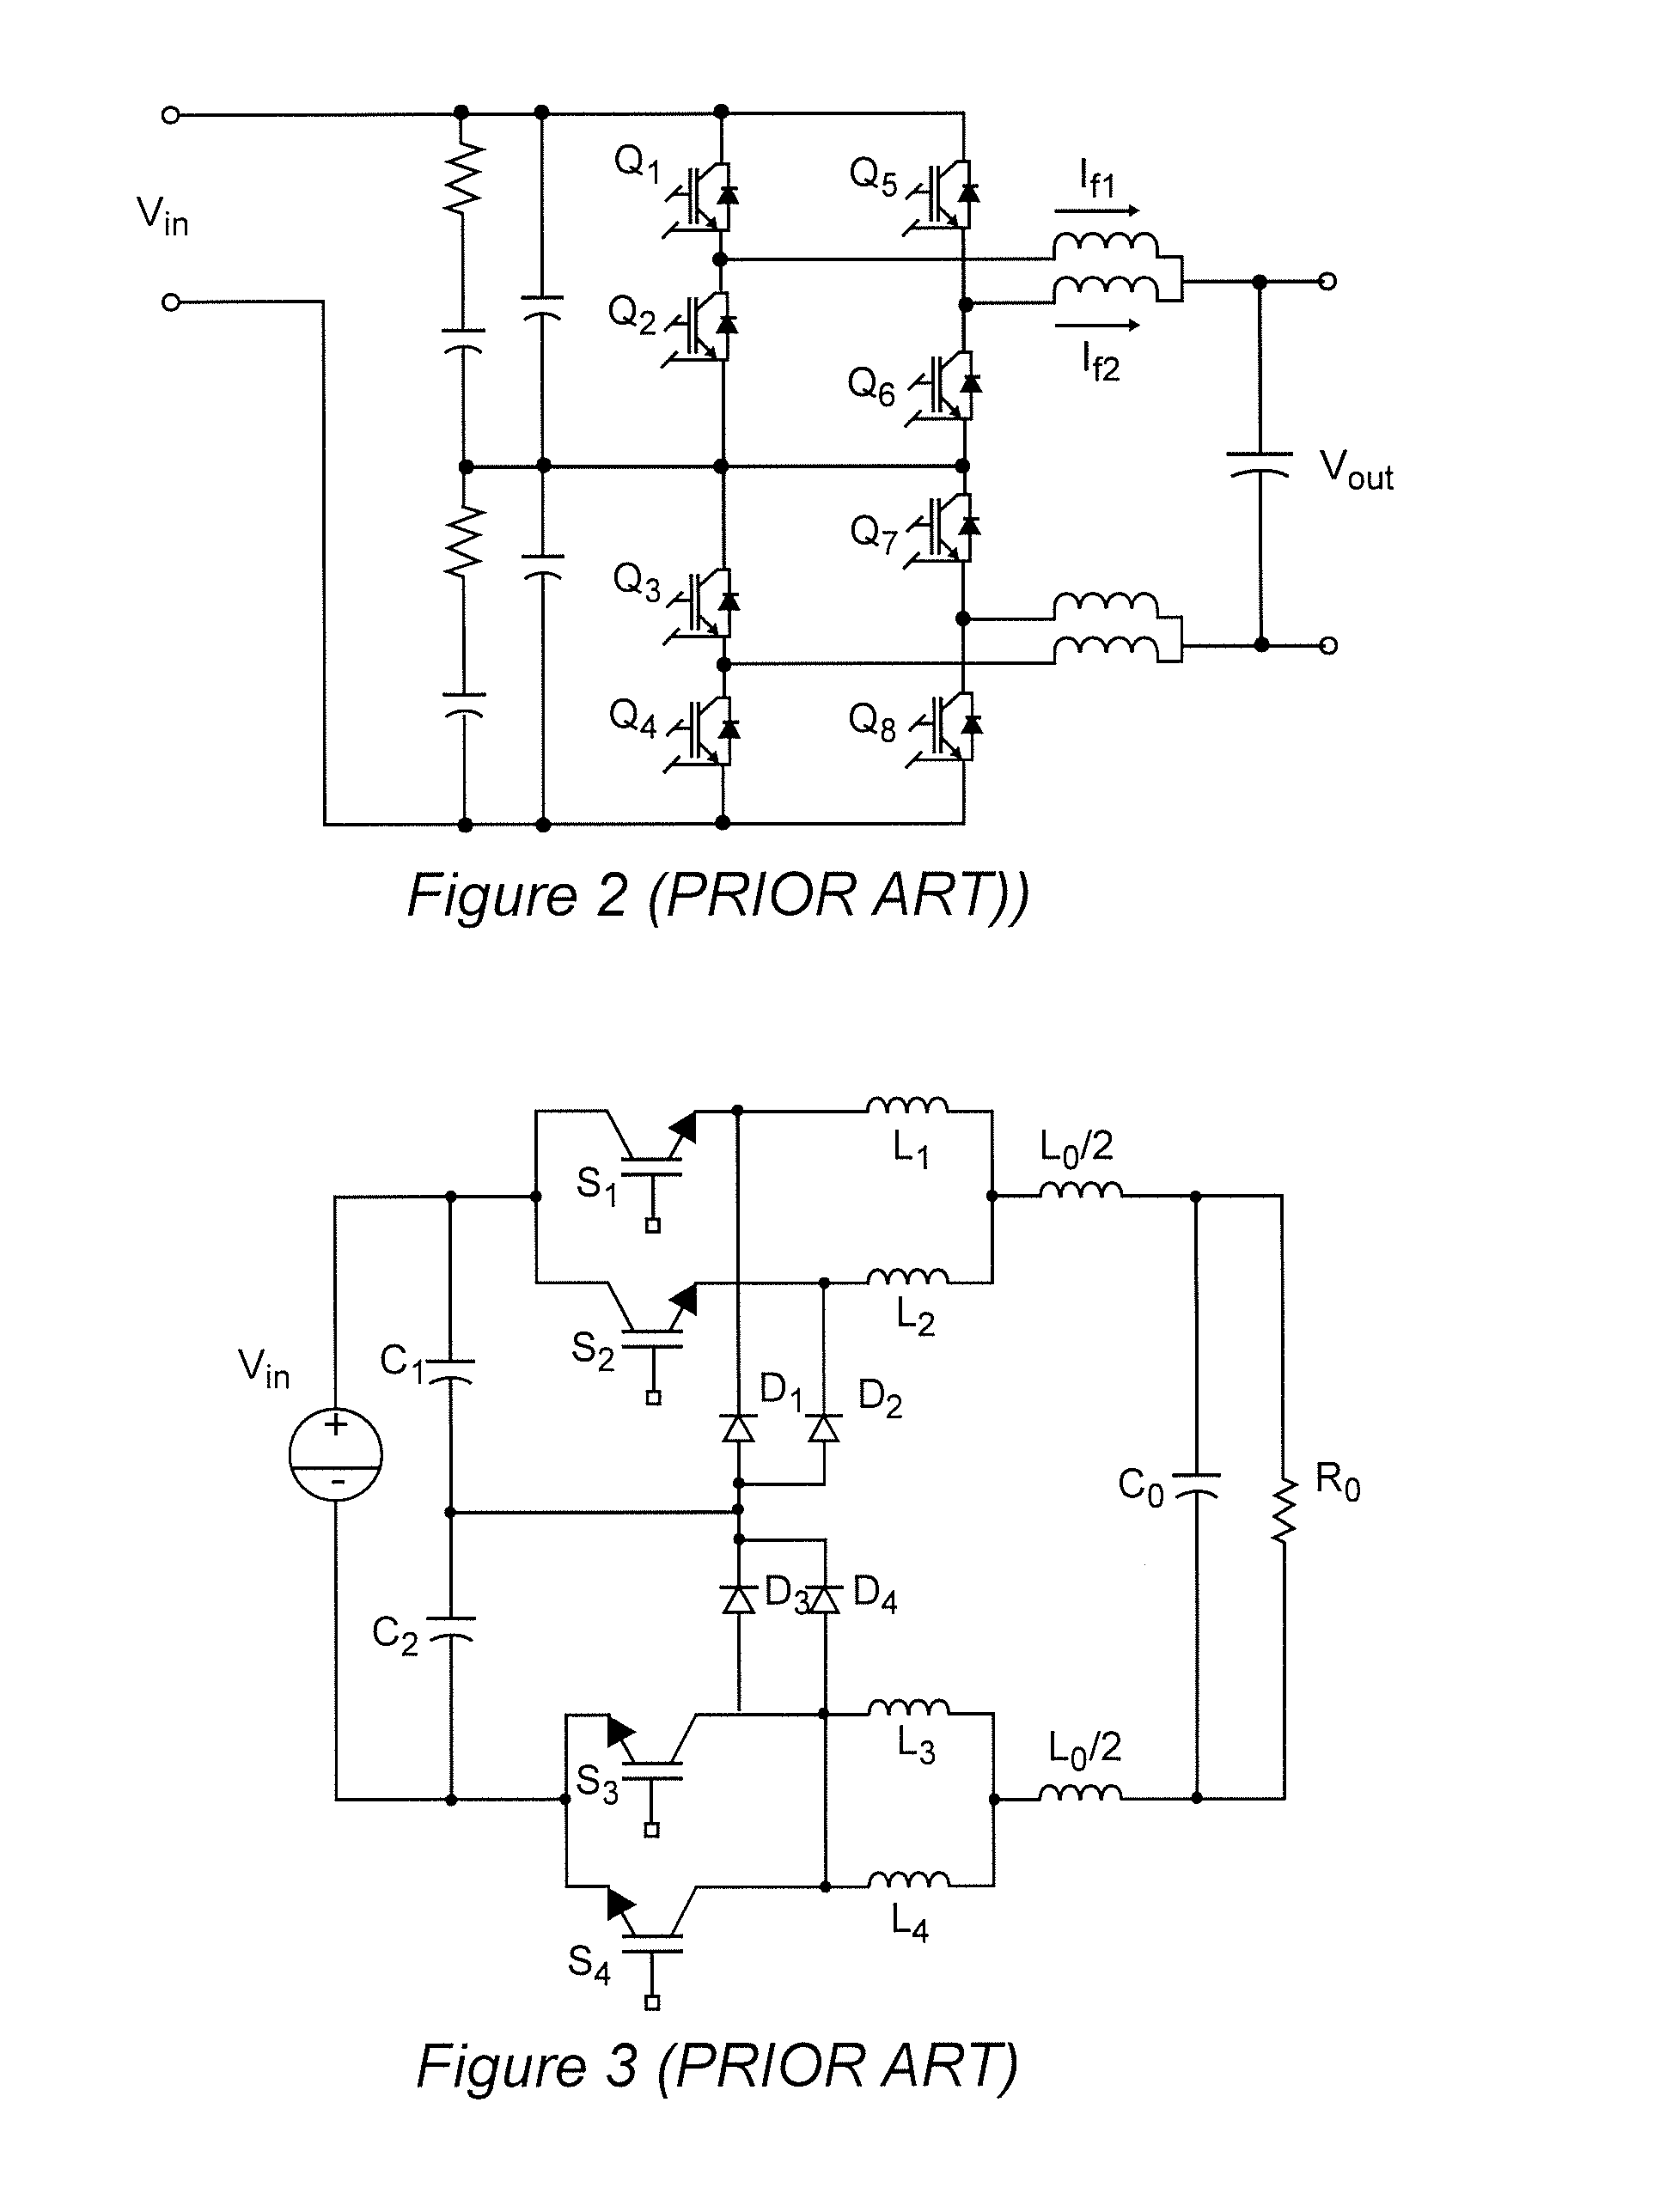 Coupled Inductor for Interleaved Multi-Phase Three-Level DC-DC Converters